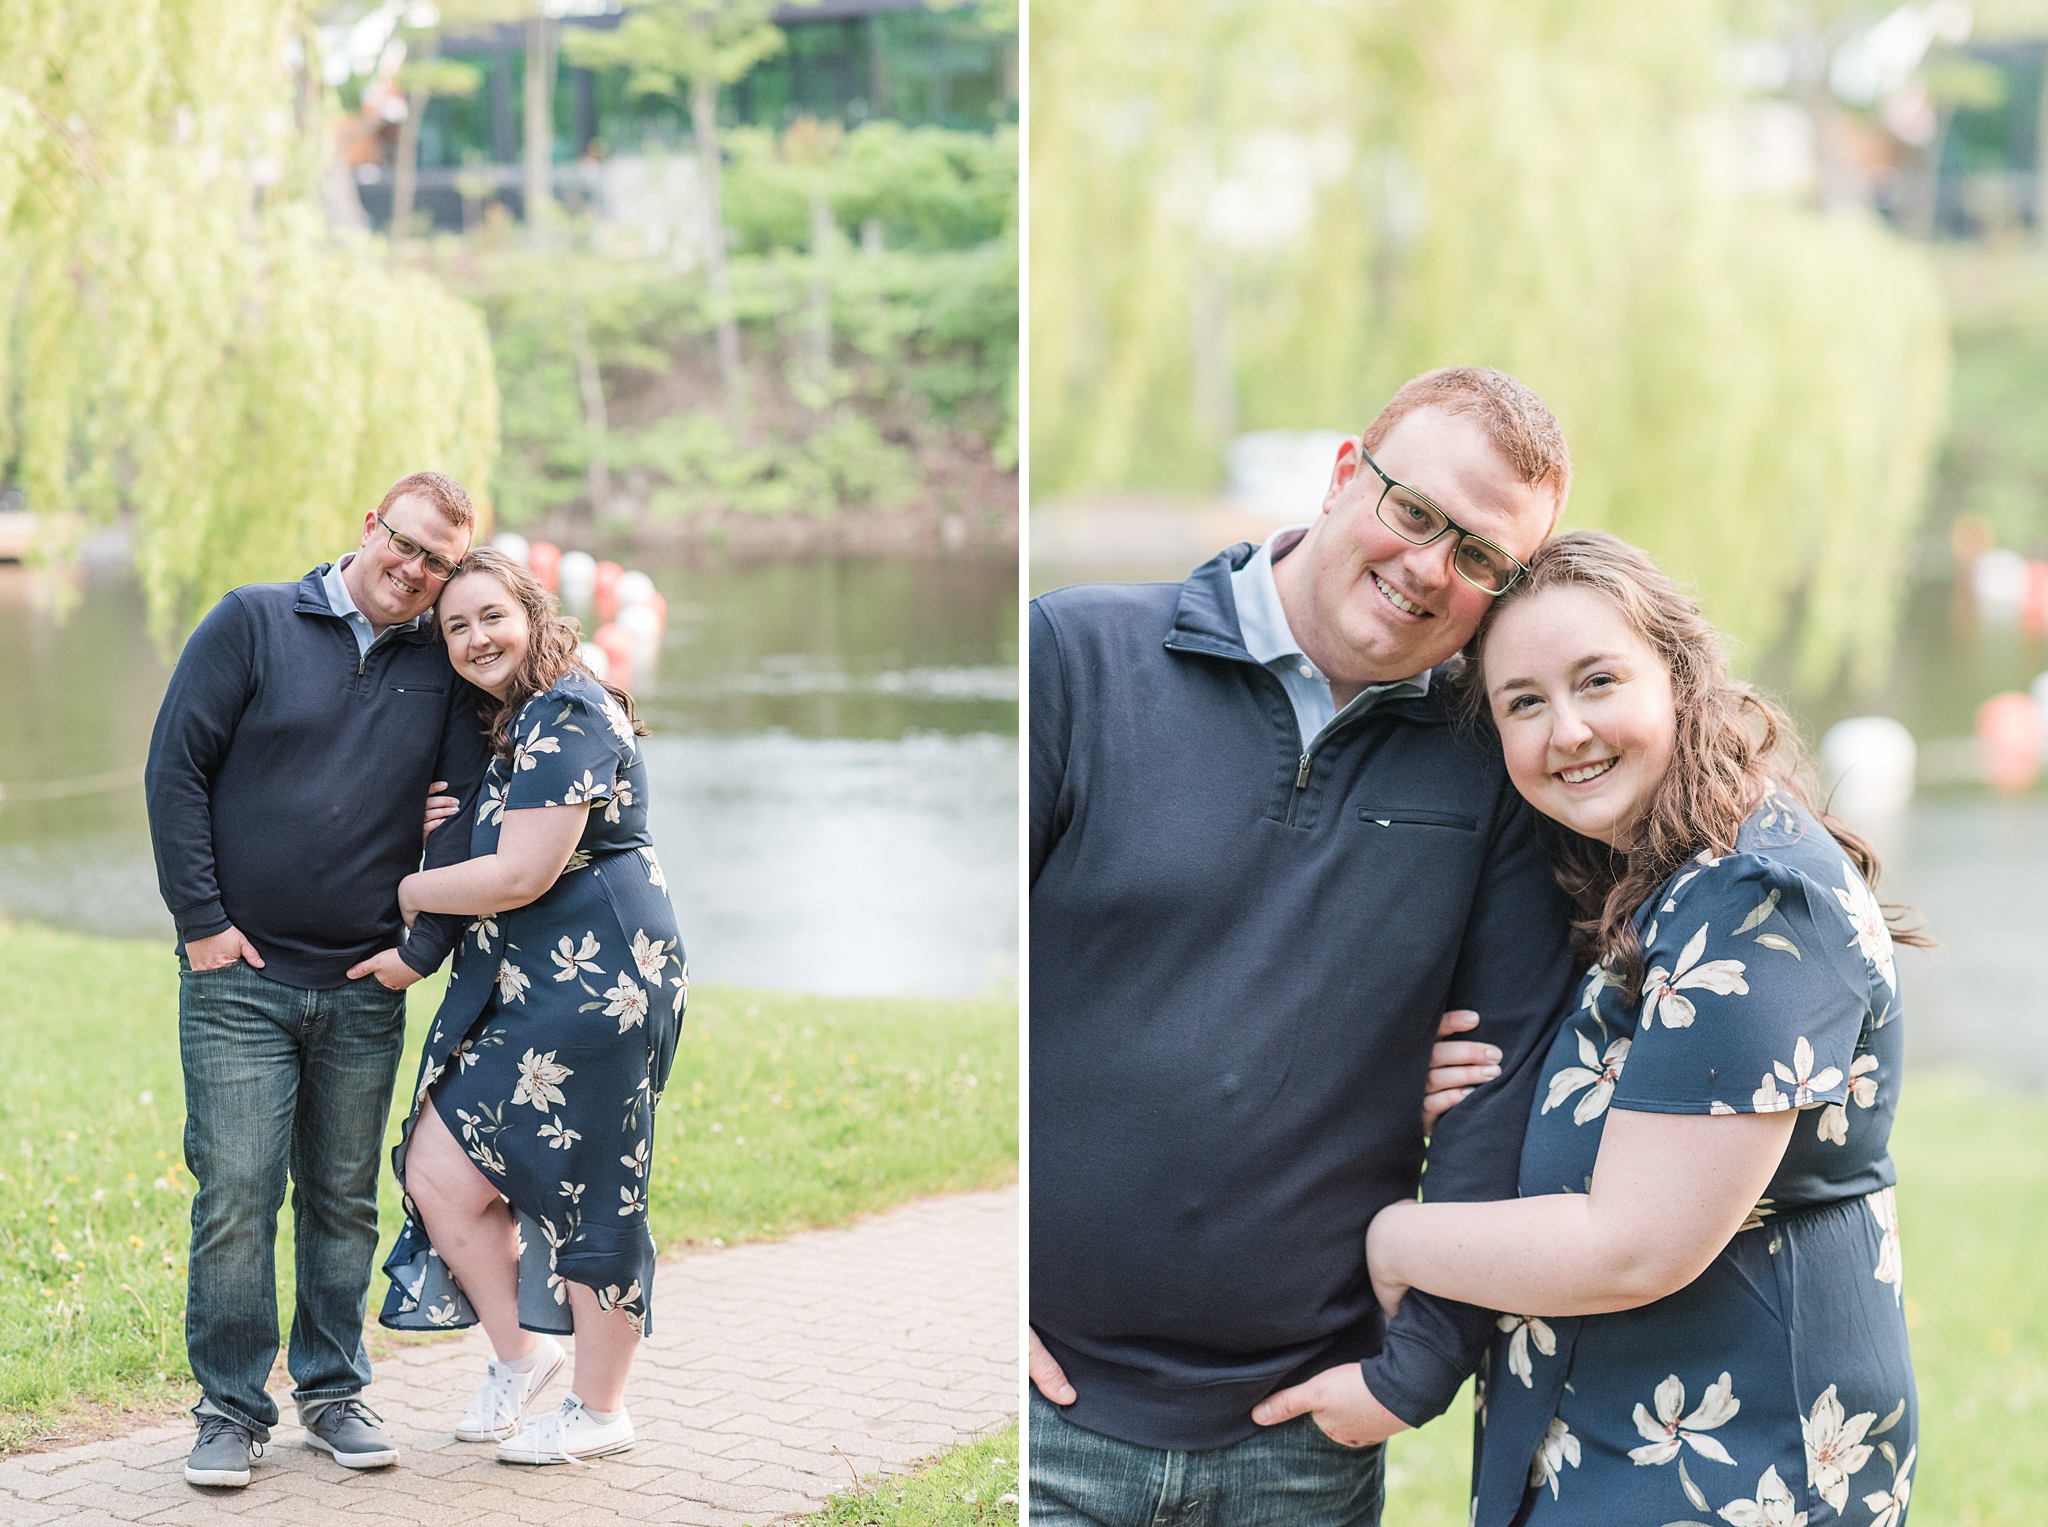 Fun floral springtime engagement | ottawa engagement | engagement photos at watson’s mill in manotick get more inspiration from this fun springtime engagement session. #ottawawedding #weddingphotography #ottawaweddings